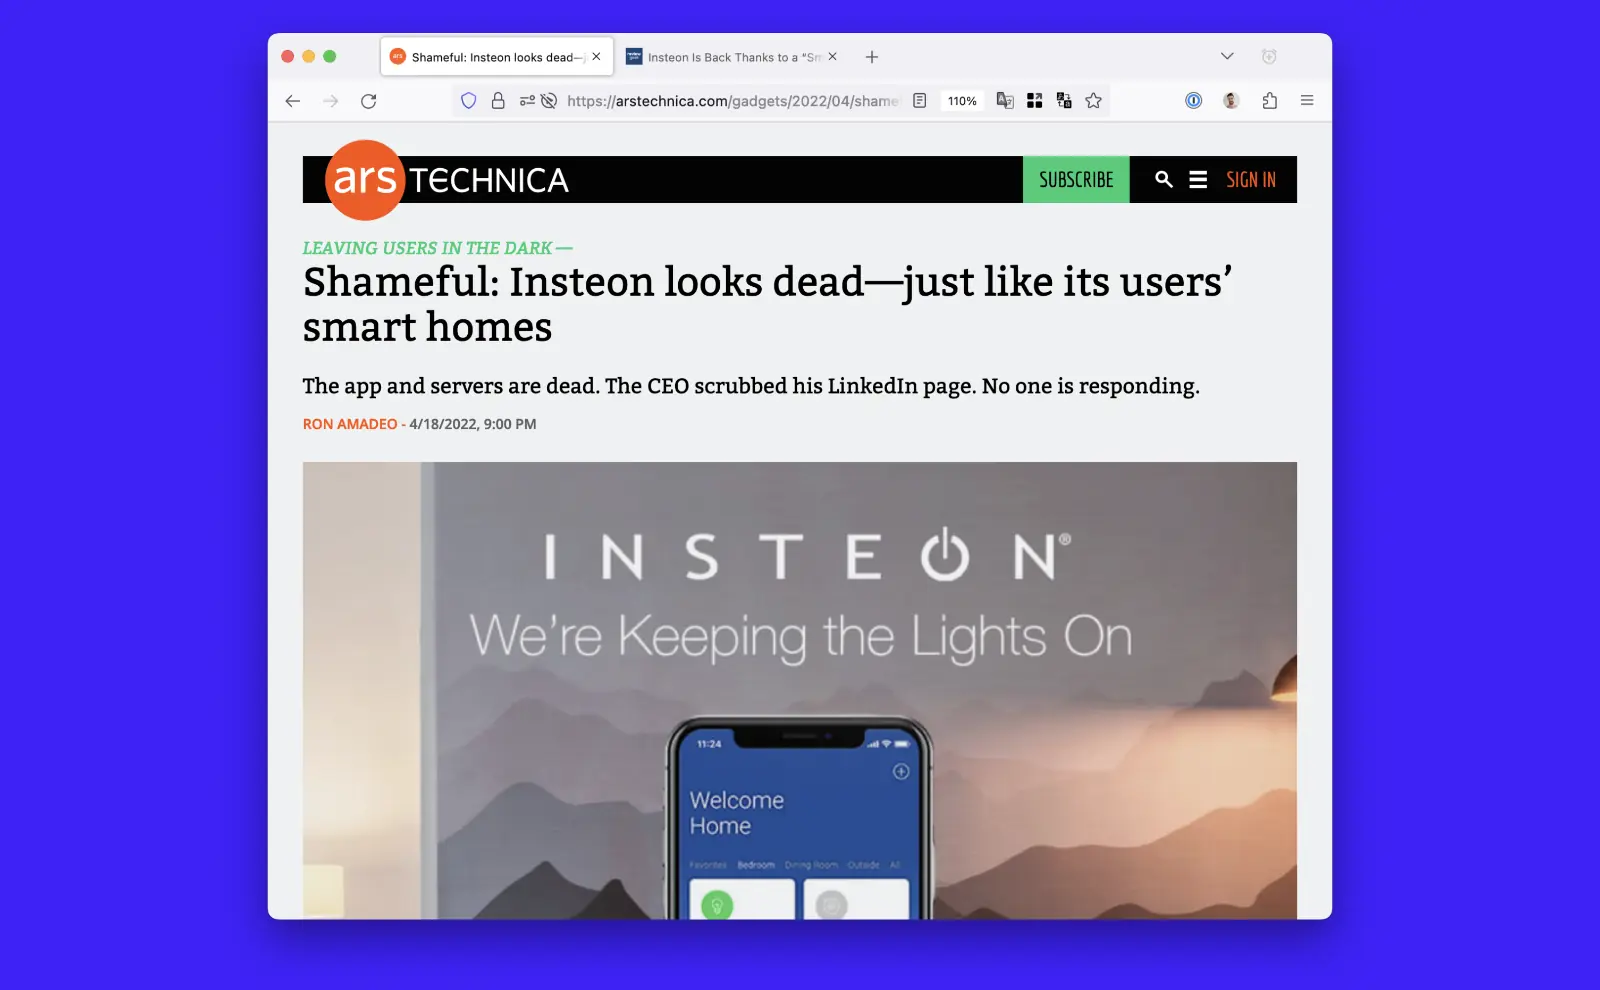 Screenshot of Ars Technica article. Leaving users in the dark. Shameful: Insteon looks dead-just like its users smart homes. The app and servers are dead. The CEO scrubbed his LinkedIn page. No one is responding.